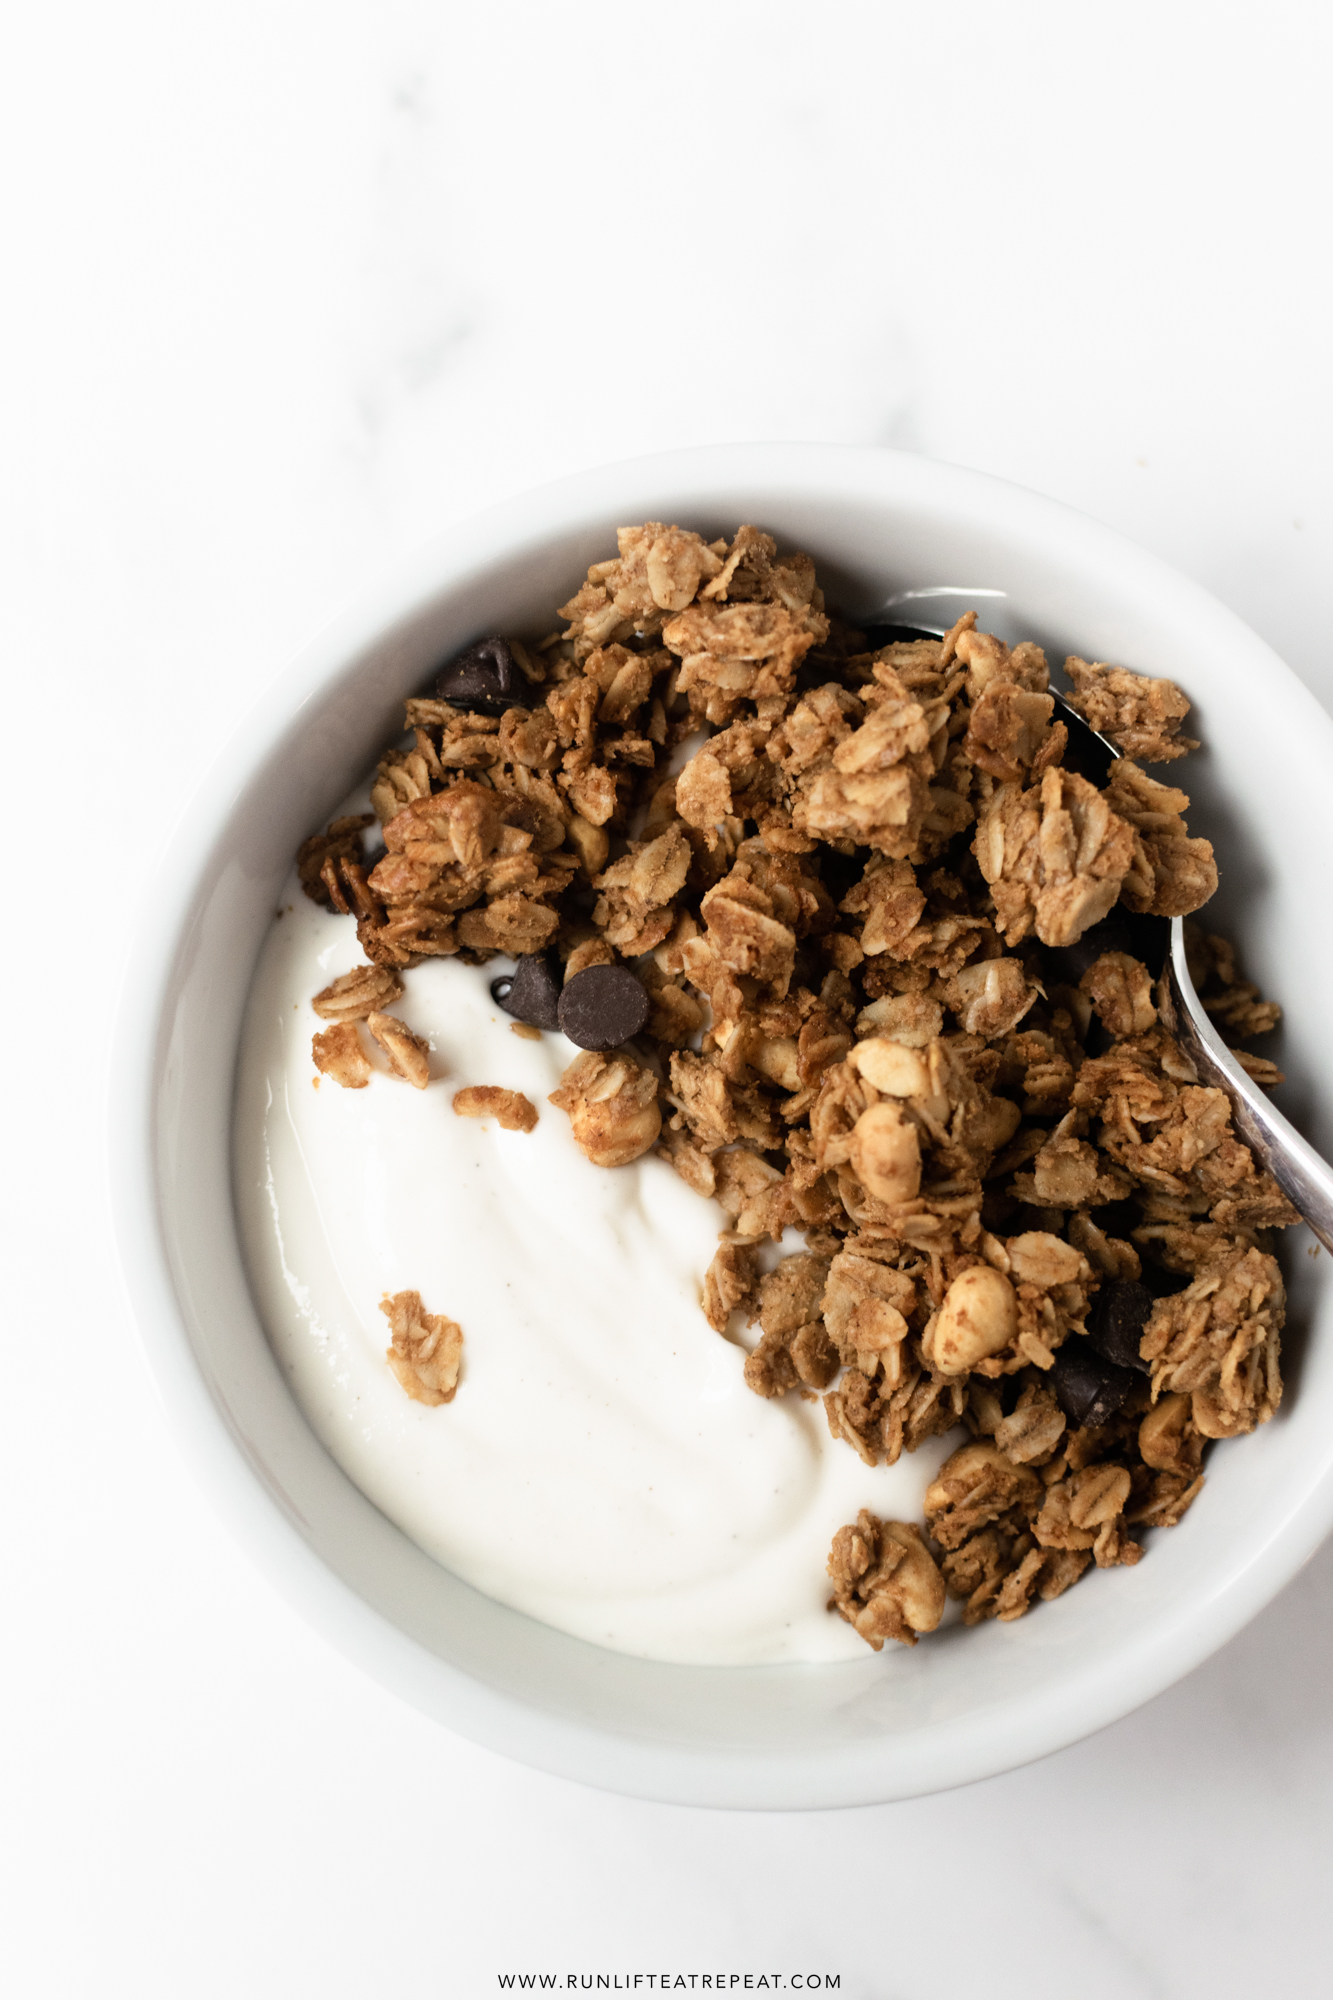 This homemade peanut butter granola is satisfying and delicious. Made with basic pantry ingredients— oats, cinnamon, coconut oil, honey, and maple syrup. With tons of flavor in each bite, you'll keep coming back for more!